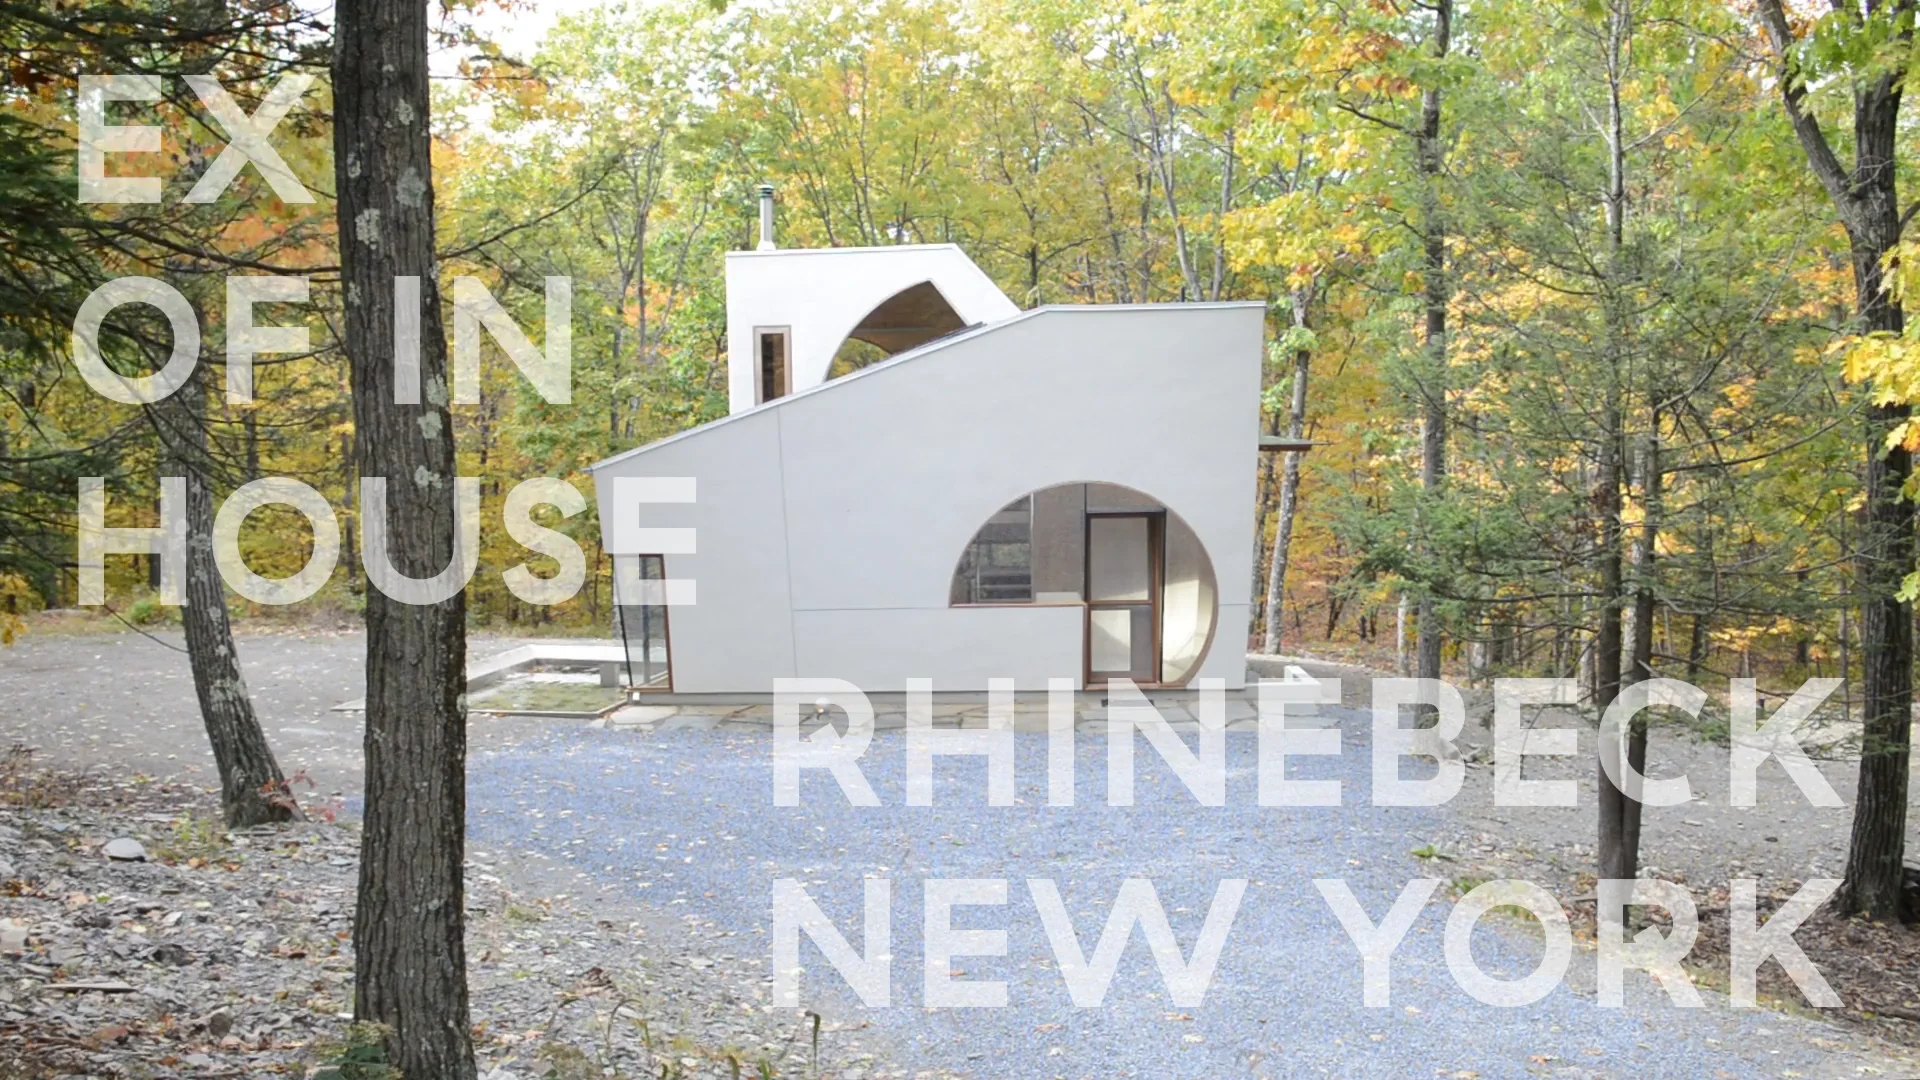 Steven Holl carves boolean voids from Ex of In House in New York state